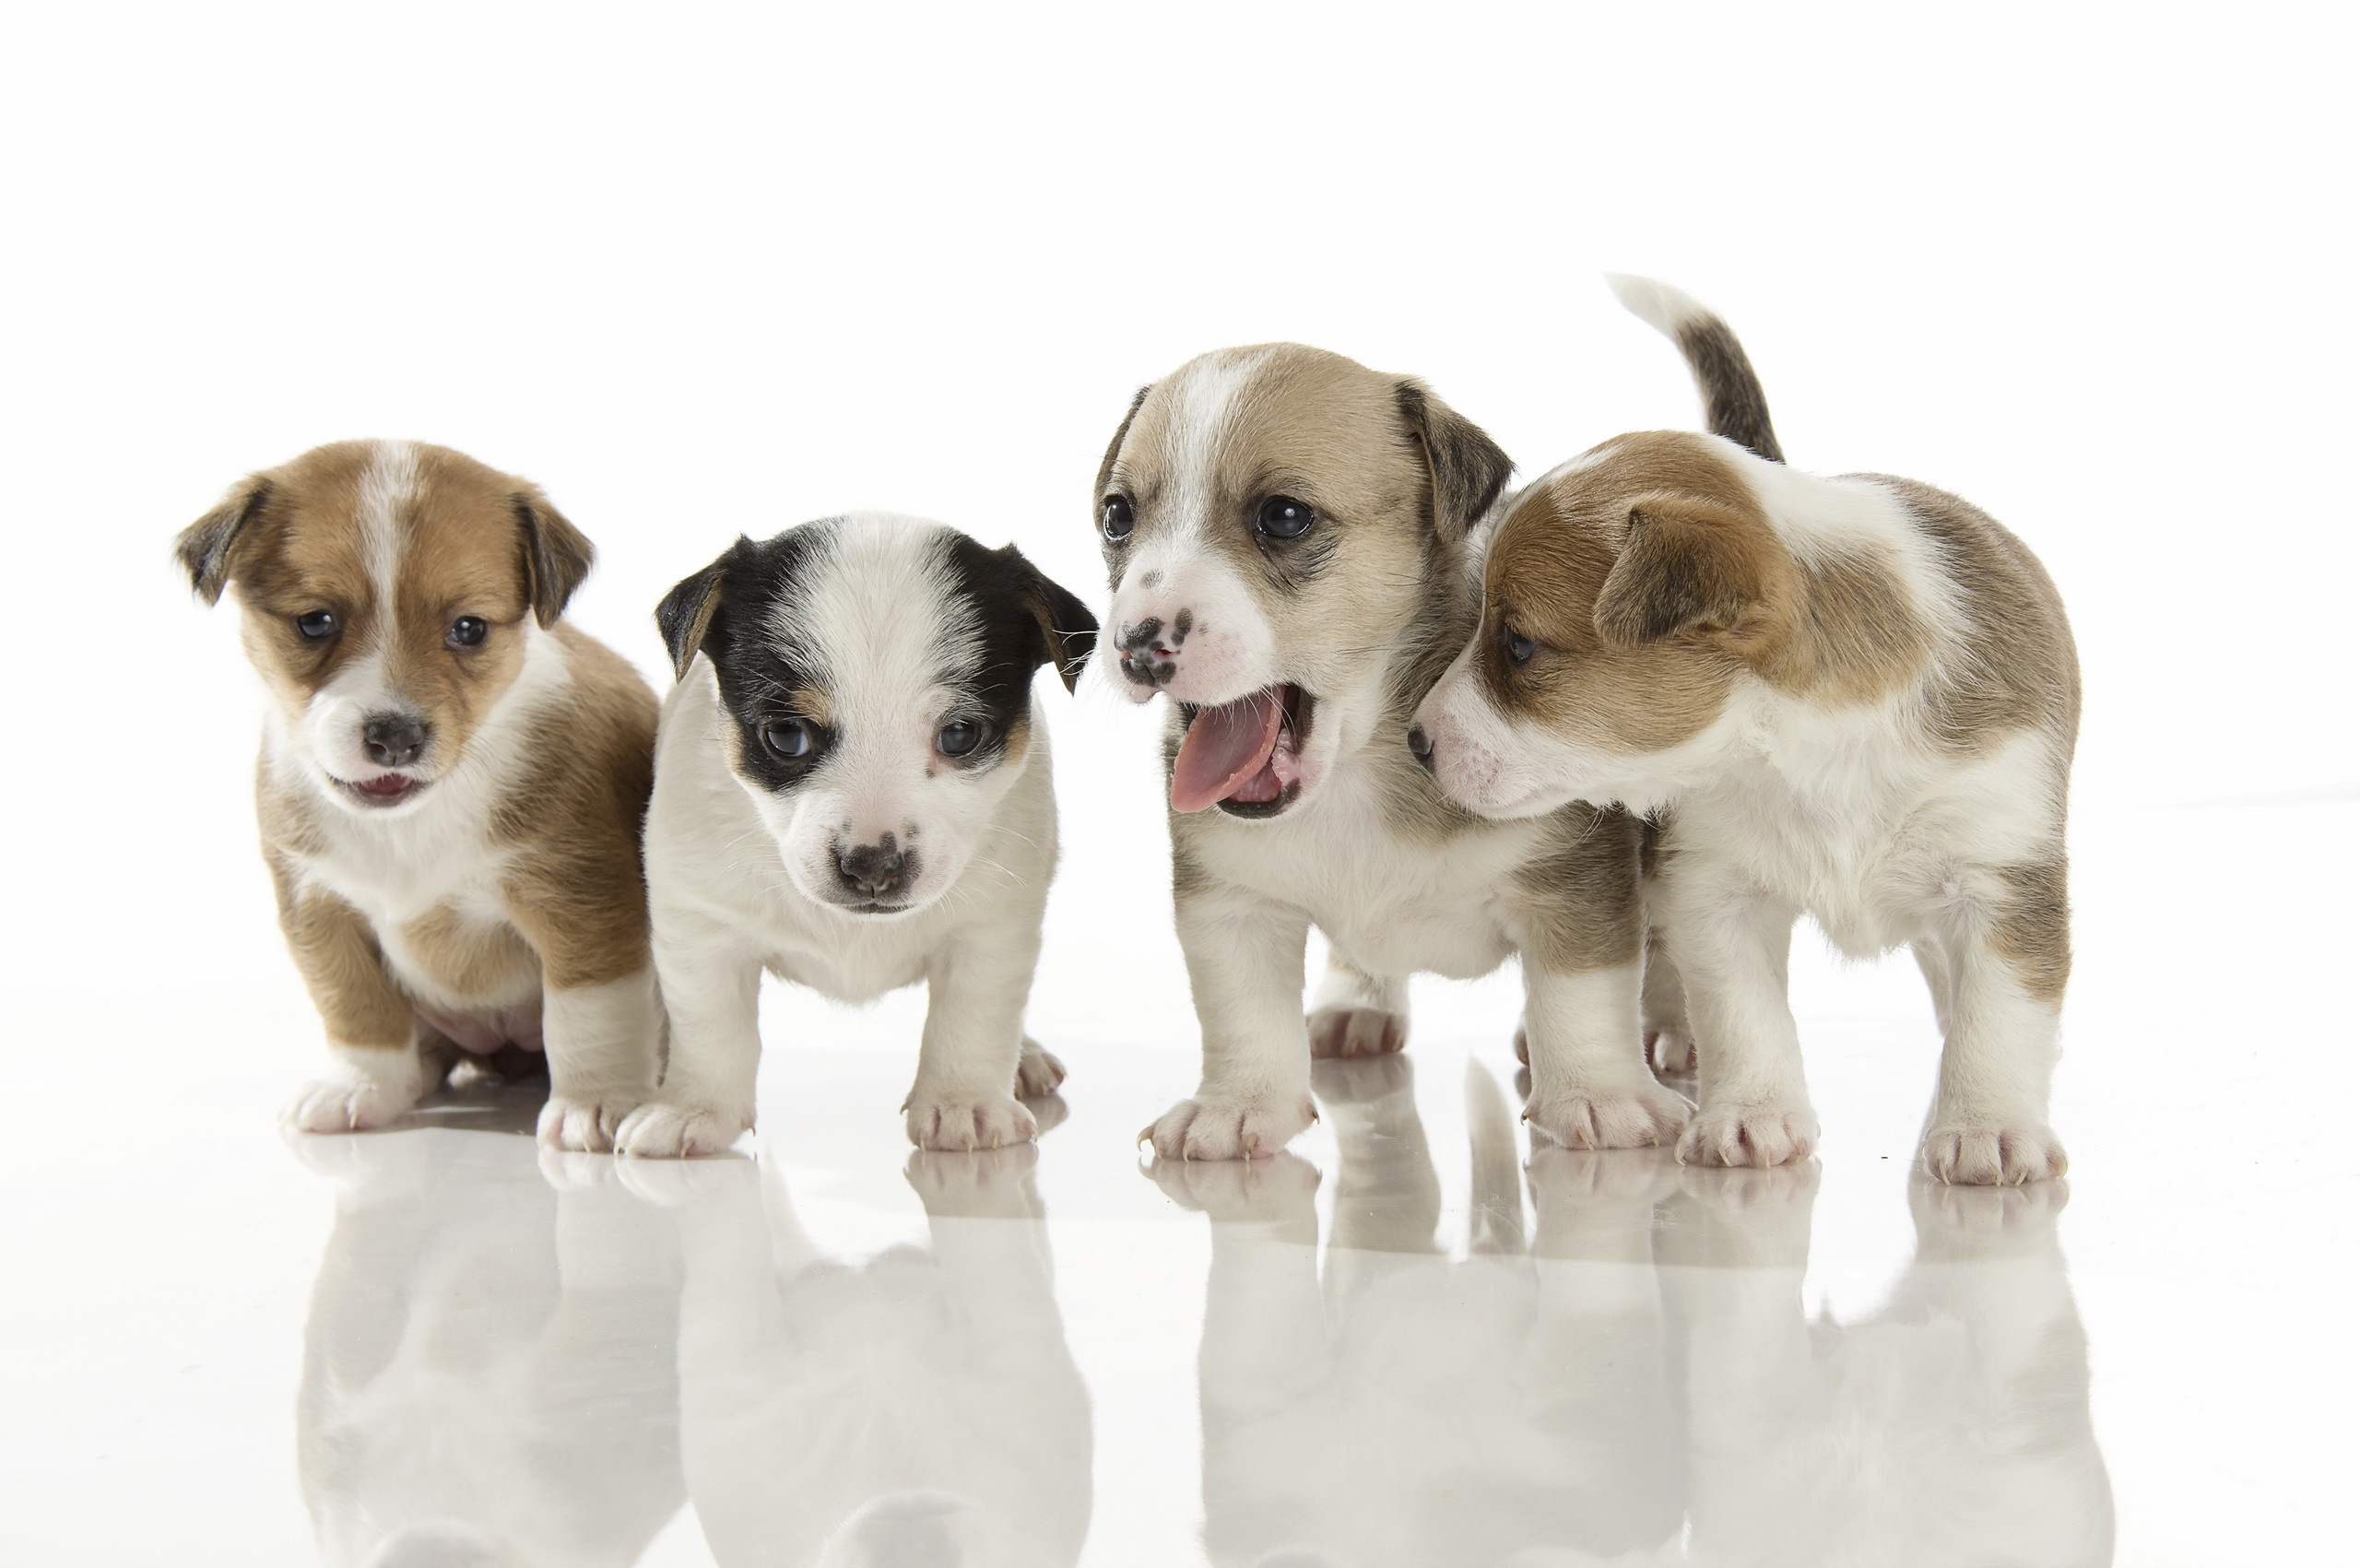 General 2560x1701 puppies baby animals dog animals simple background reflection